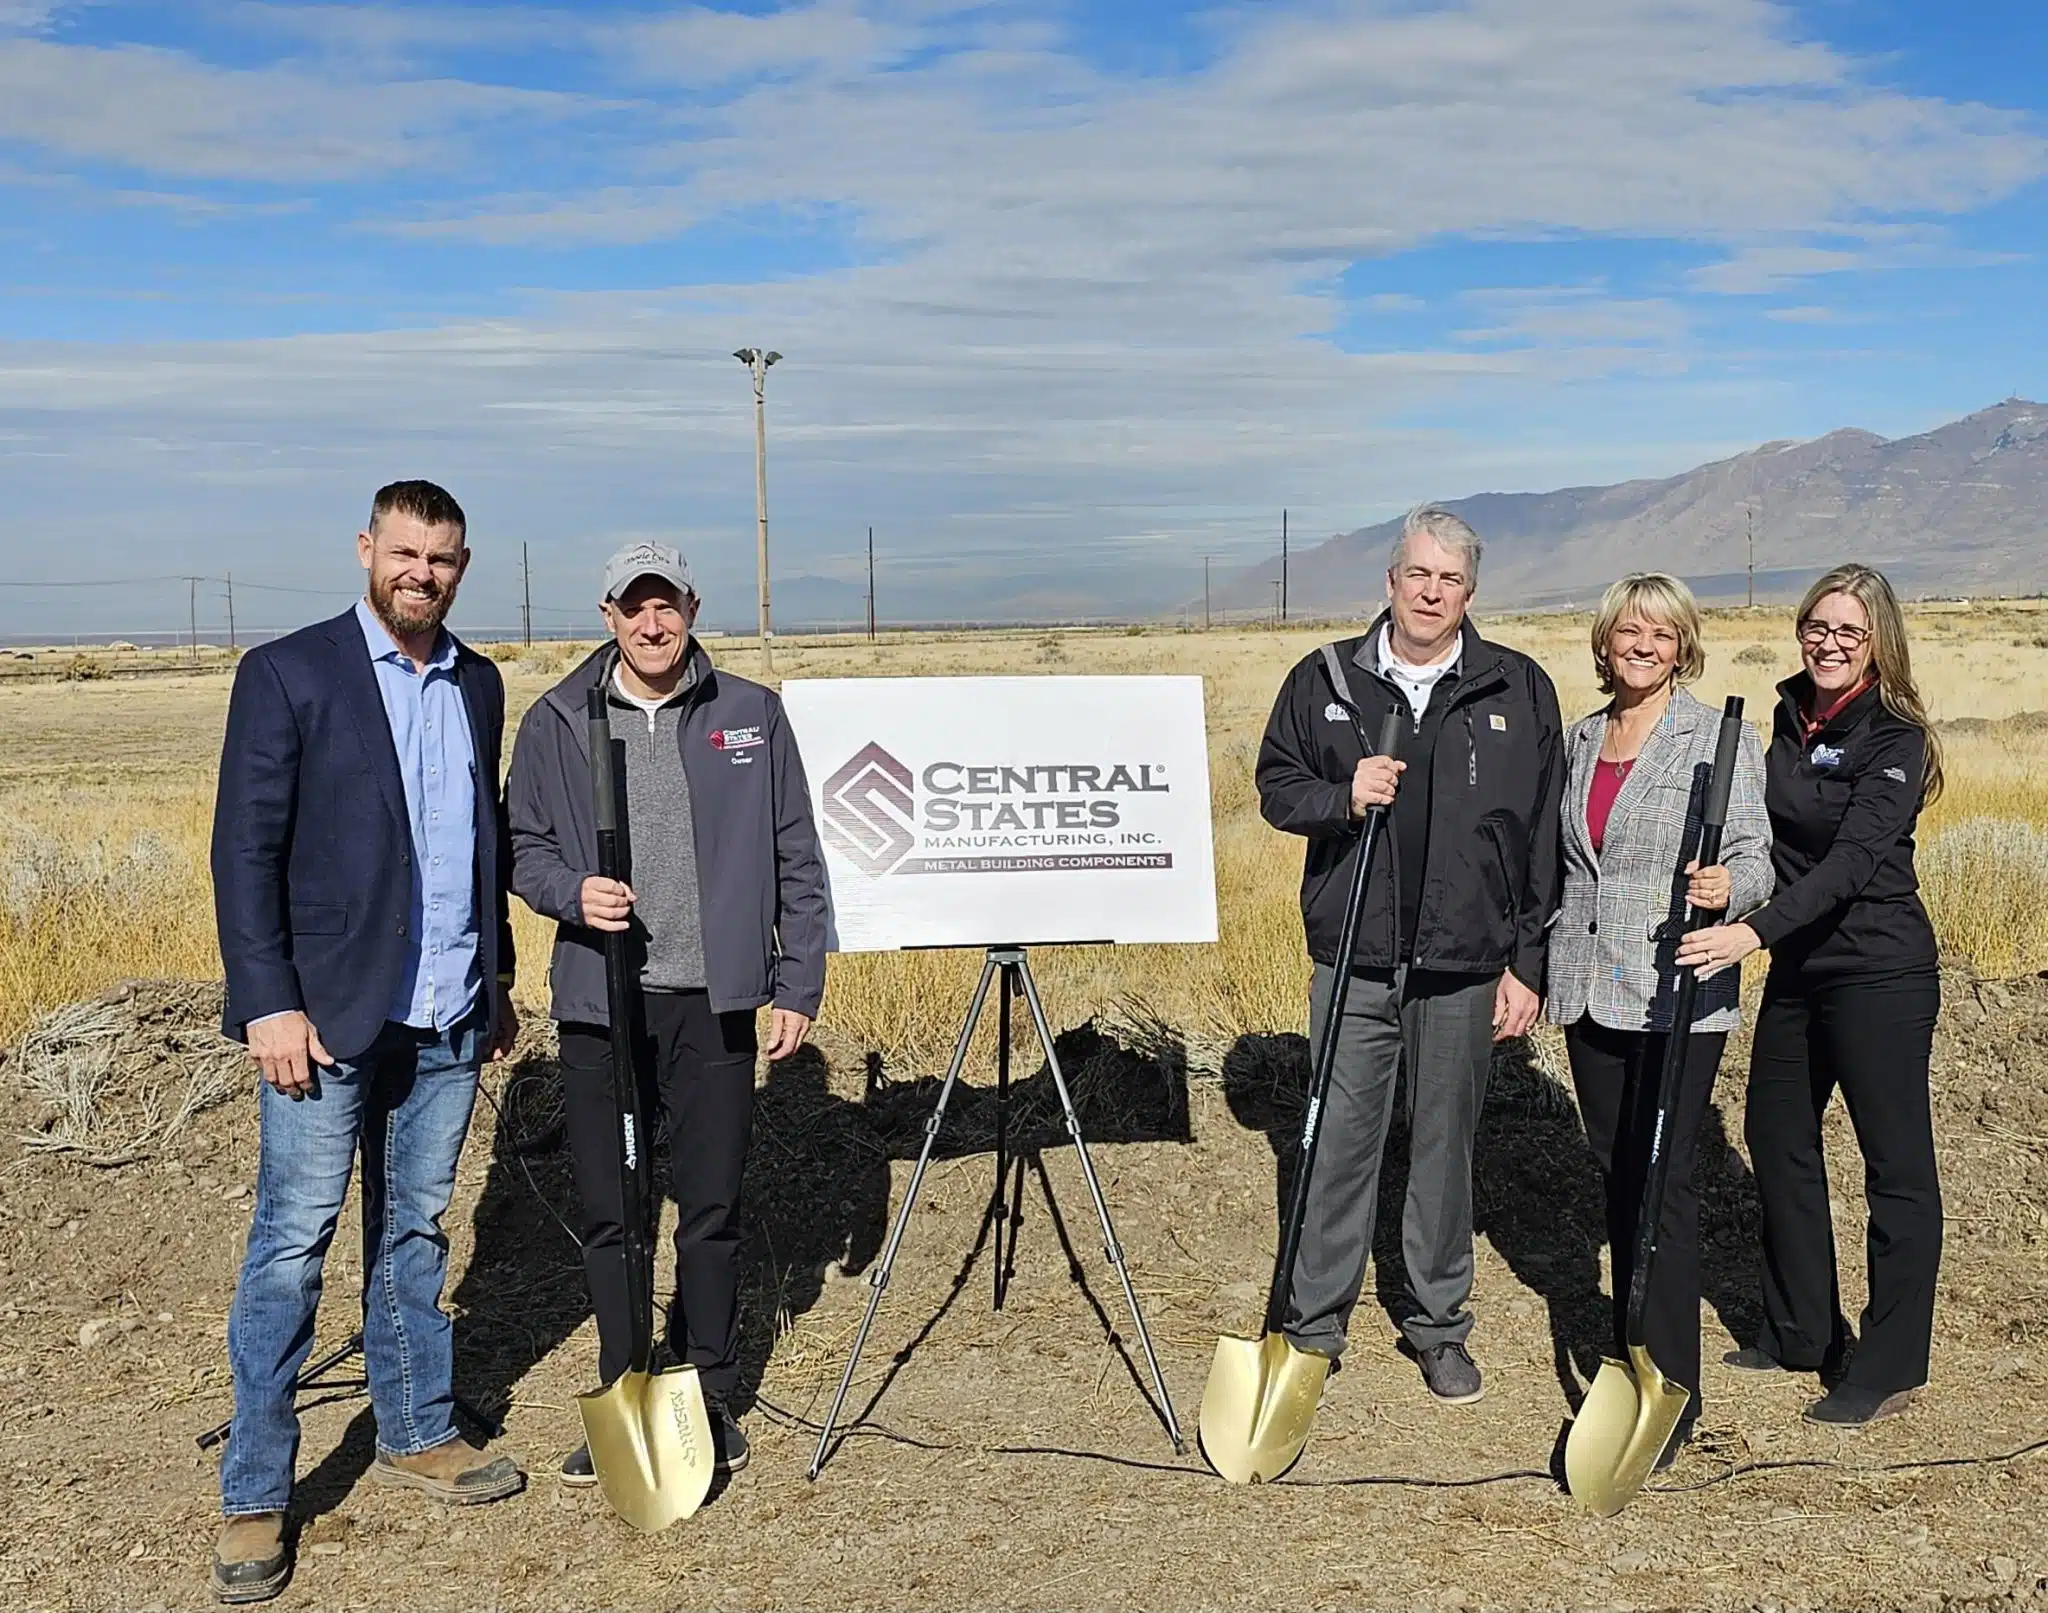 Central States Employees and Local Land Developer Breaking ground on new plant in Tooele UT